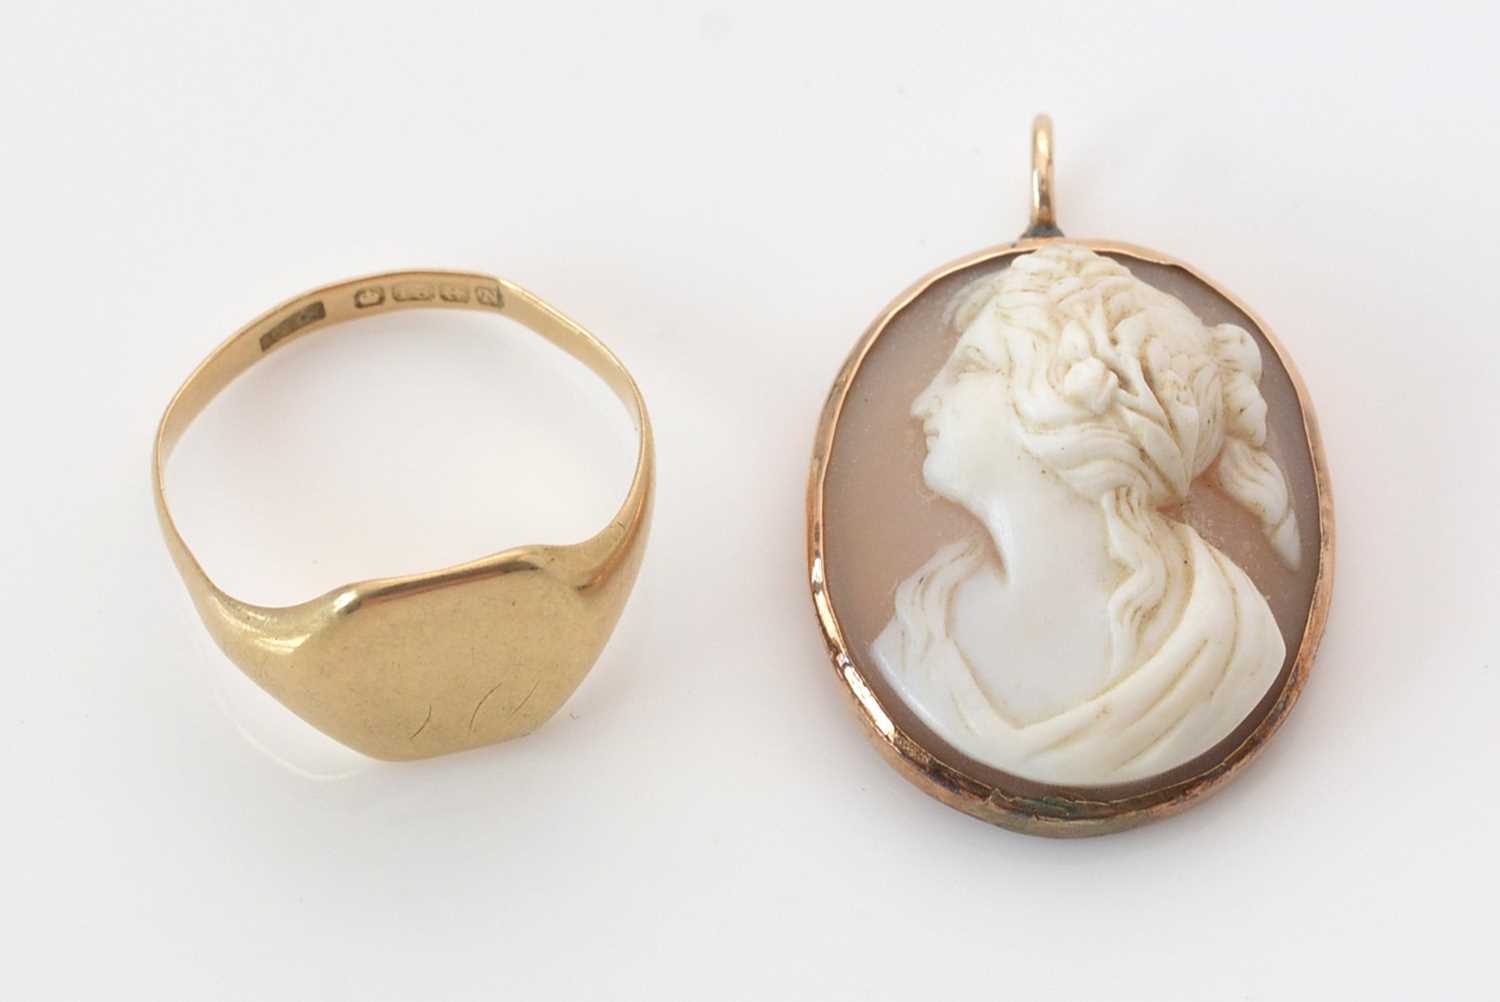 Lot 295 - 18ct. yellow gold signet ring; and a carved shell Cameo.